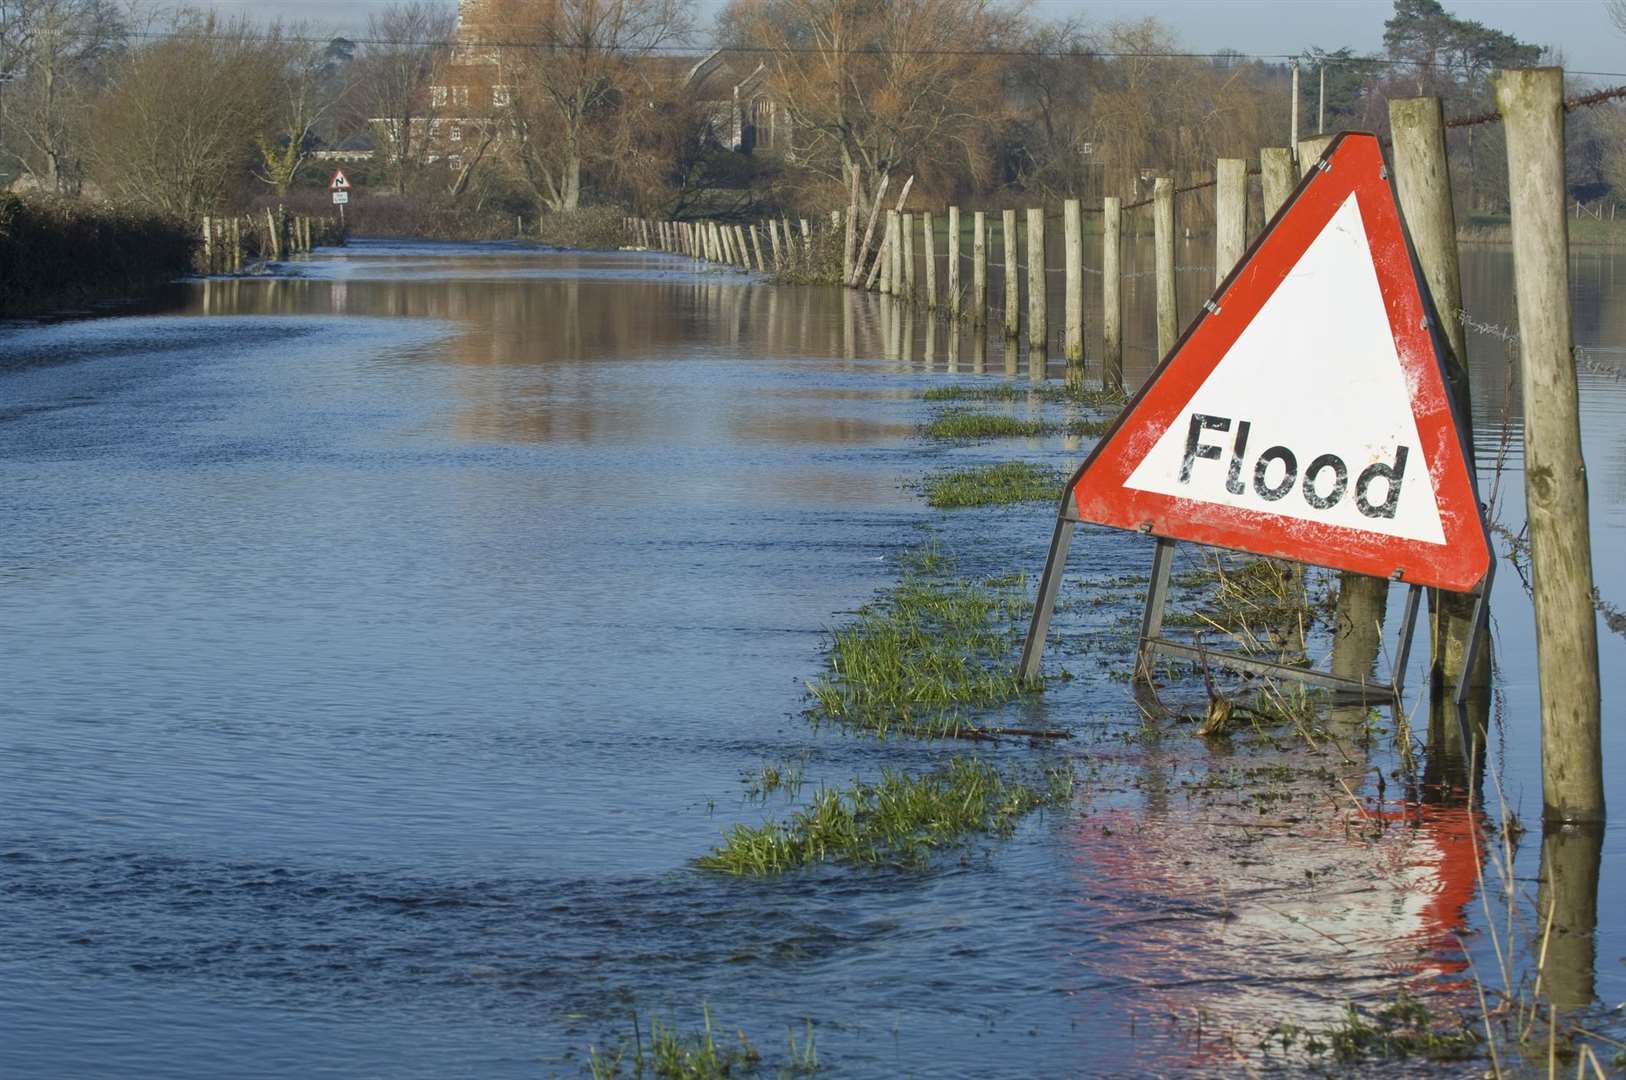 A flood warning has been issued as river levels are expected to rise.